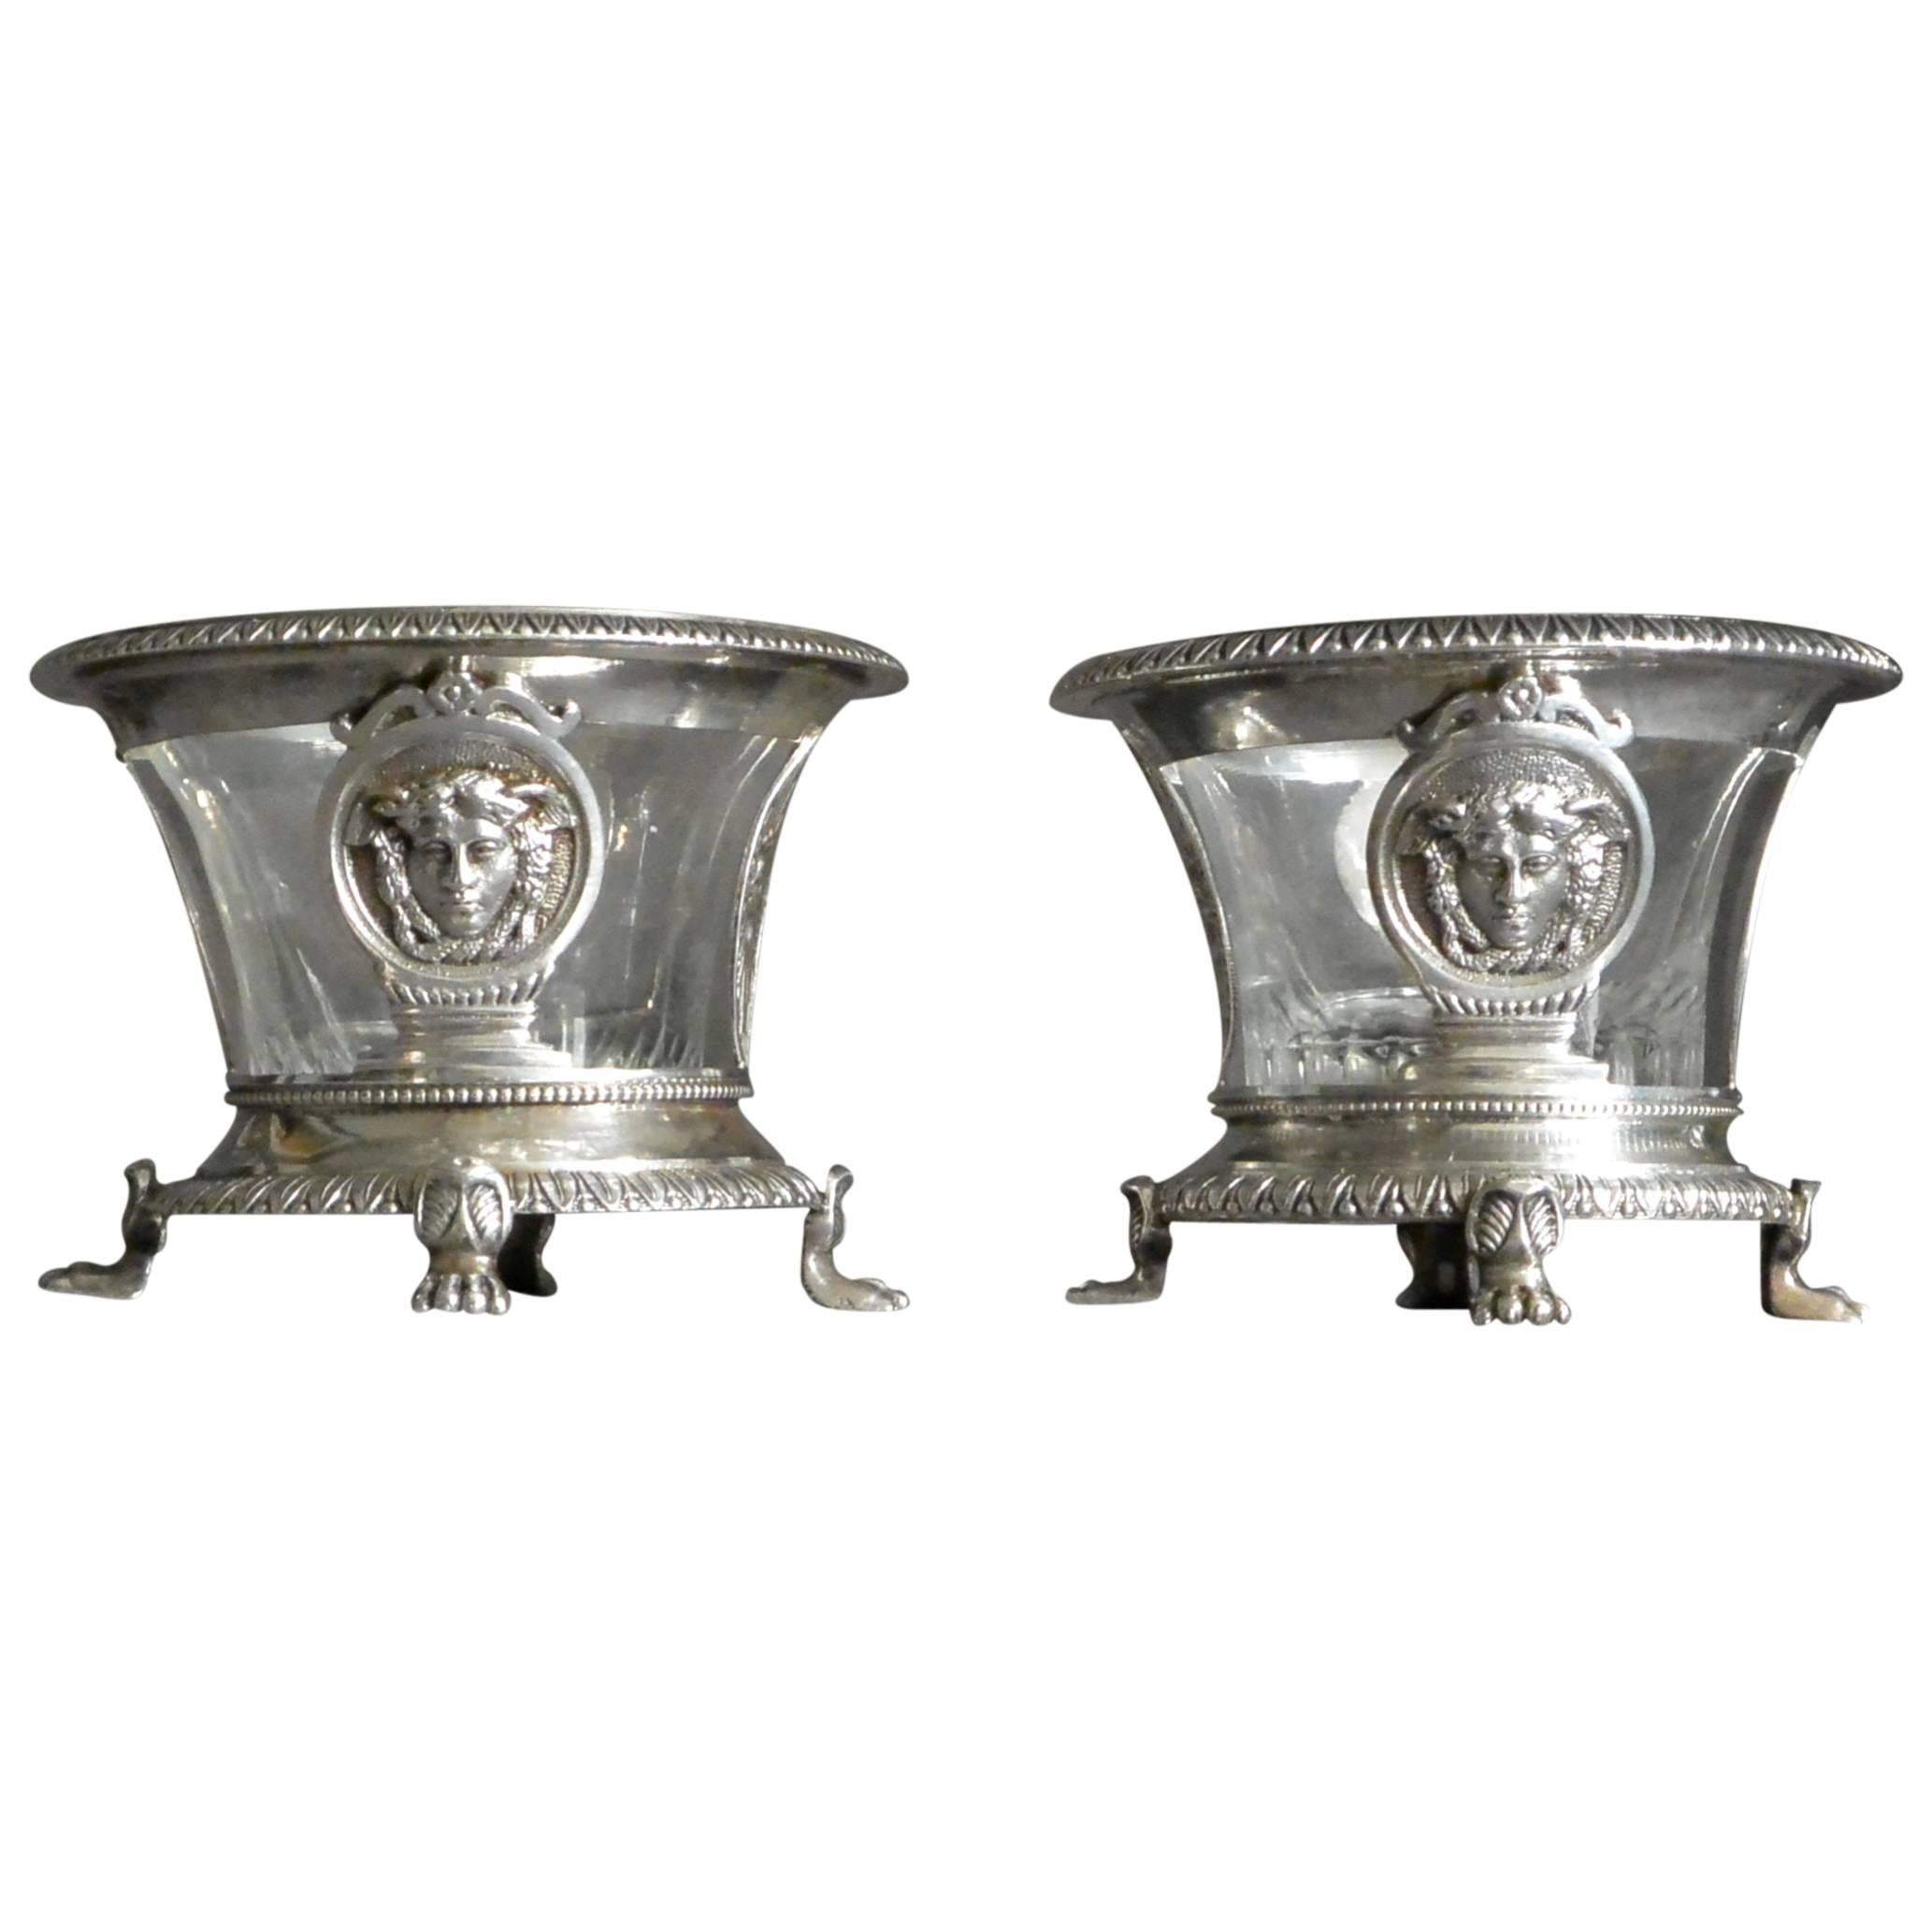 Pair of French Neoclassical silver salts. Pair of exquisite French silver salts with open work mercury medallions and leaf and bead detailing at rim and base, on paw feet with original ribbed glass liners. Hallmark for L Ruchmann, Paris, circa